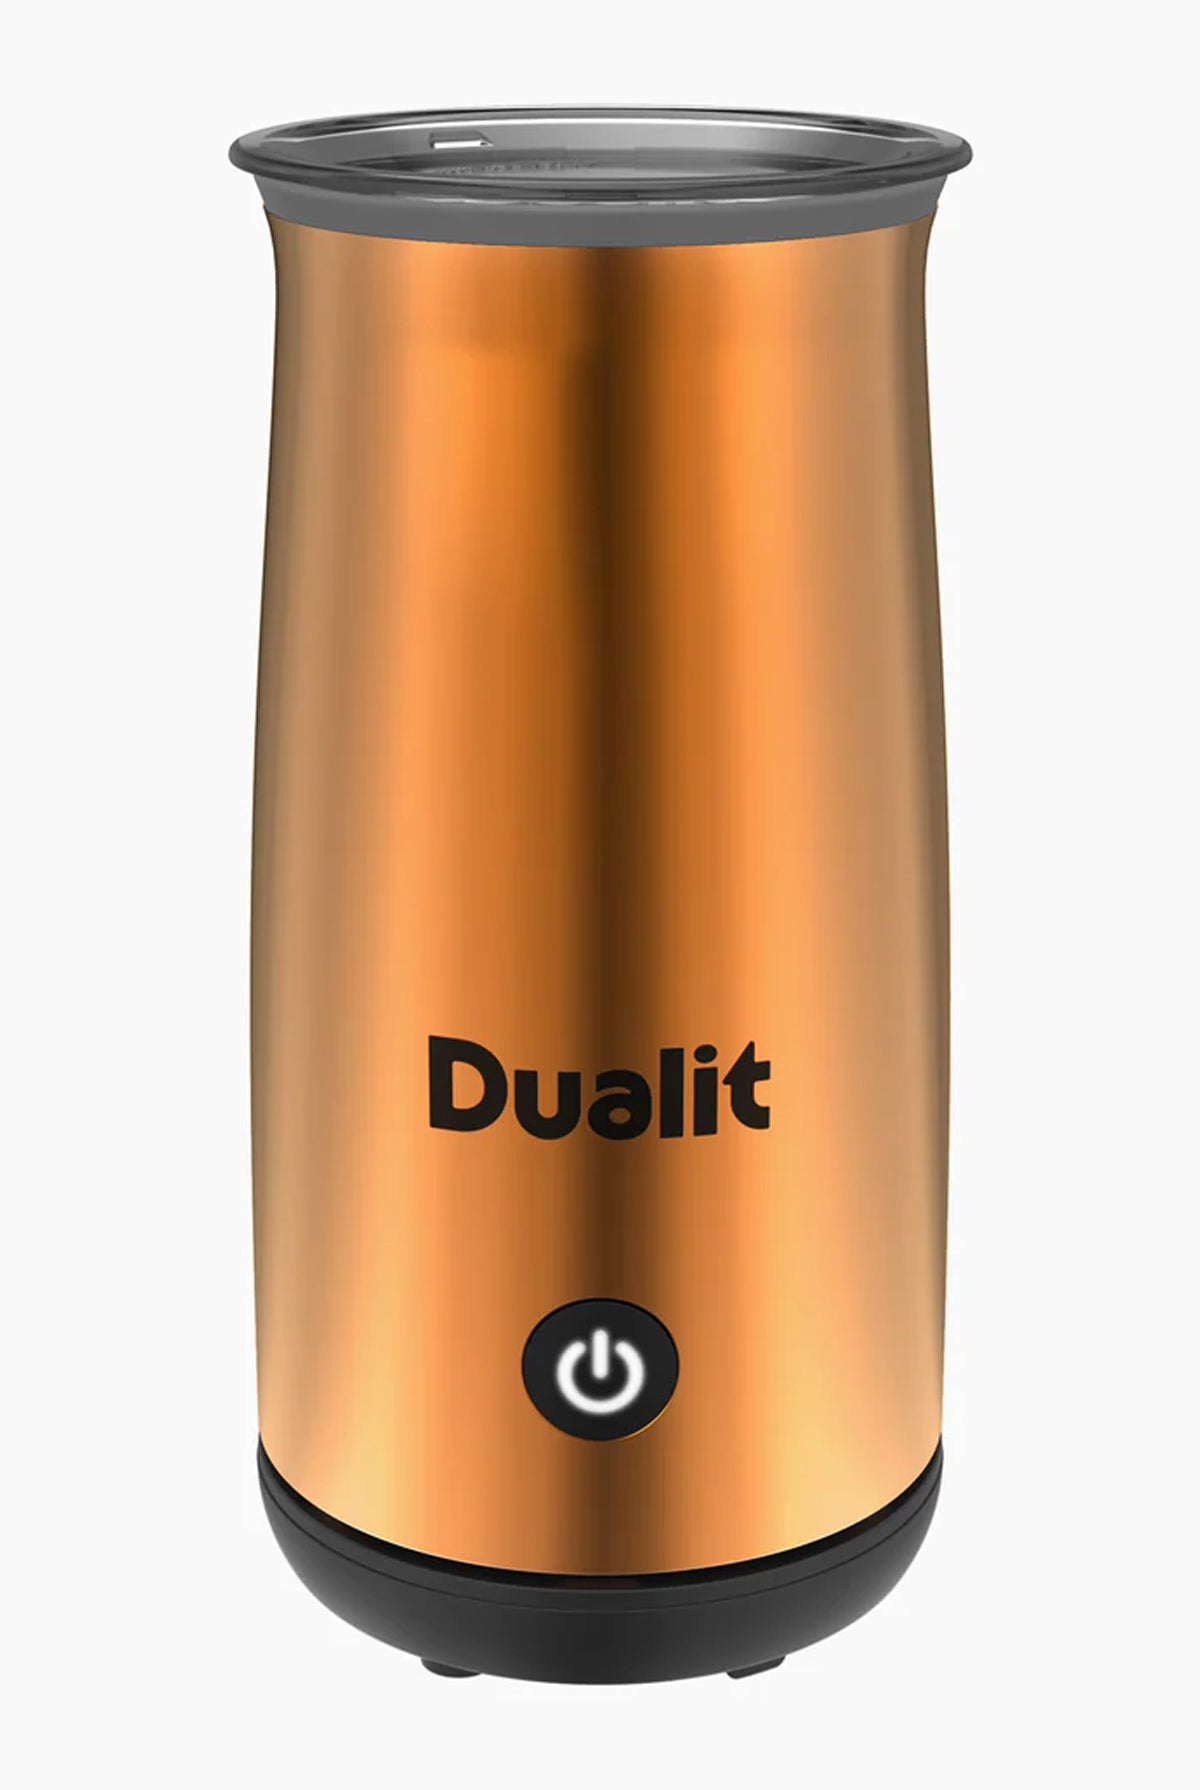 Dualit Cocoatiser Hot Chocolate Maker - Copper